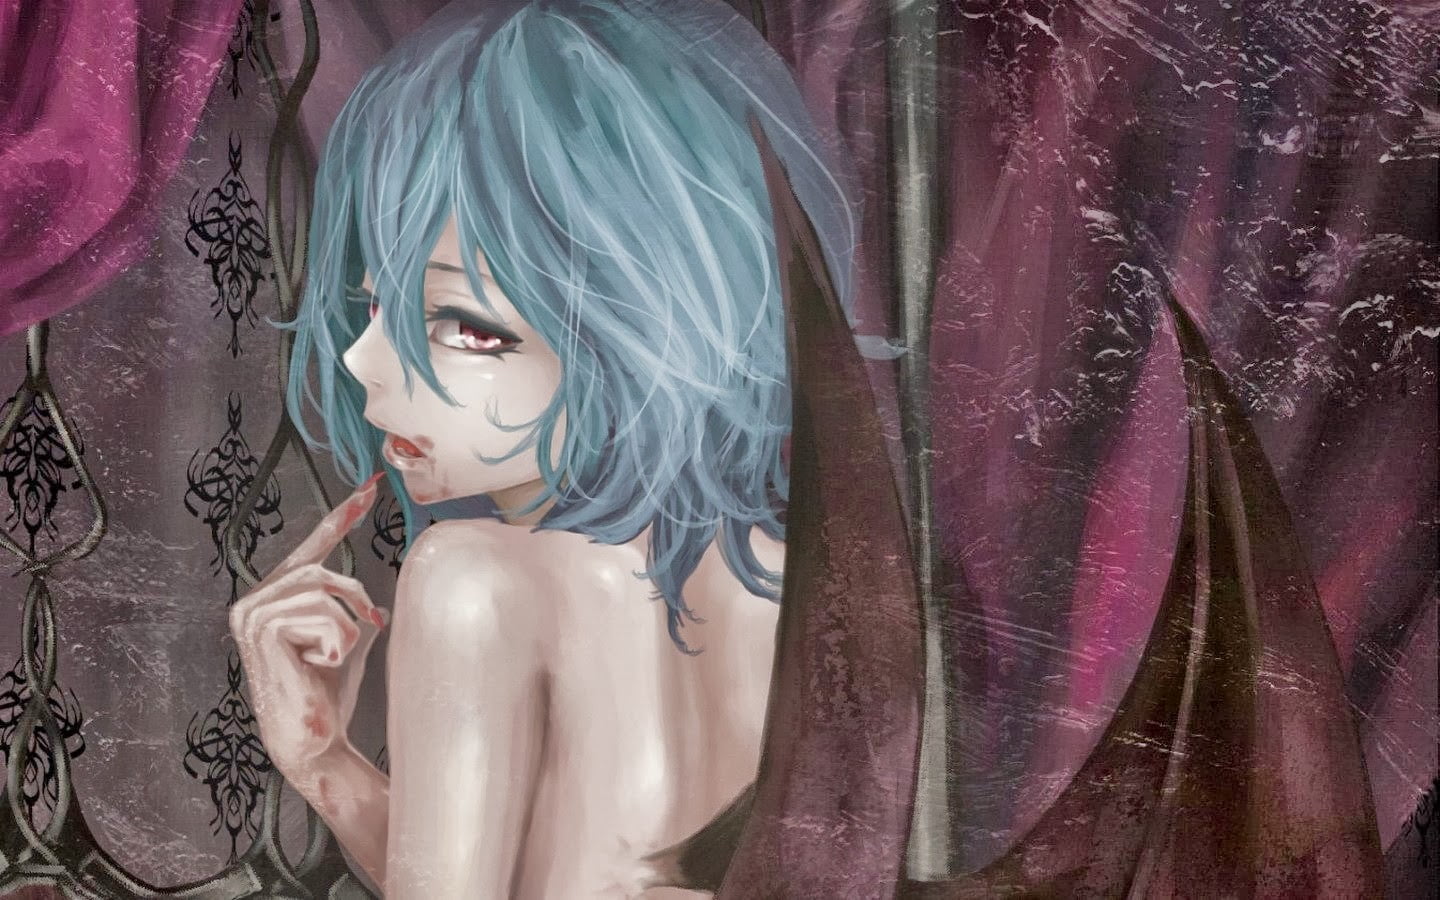 blue haired woman with red wings about to touch lips covered in blood